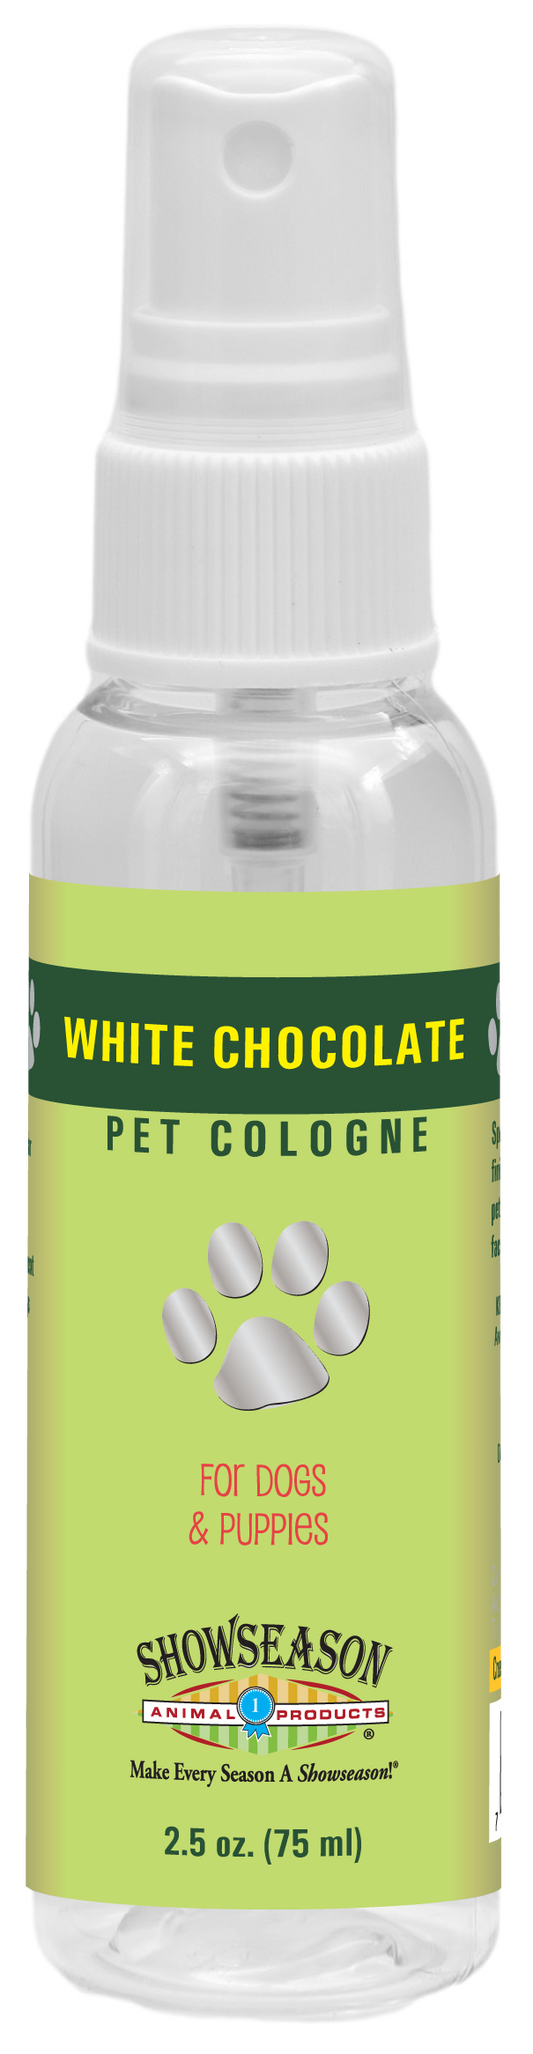 White Chocolate Pet Cologne | Showseason® -- NEW!